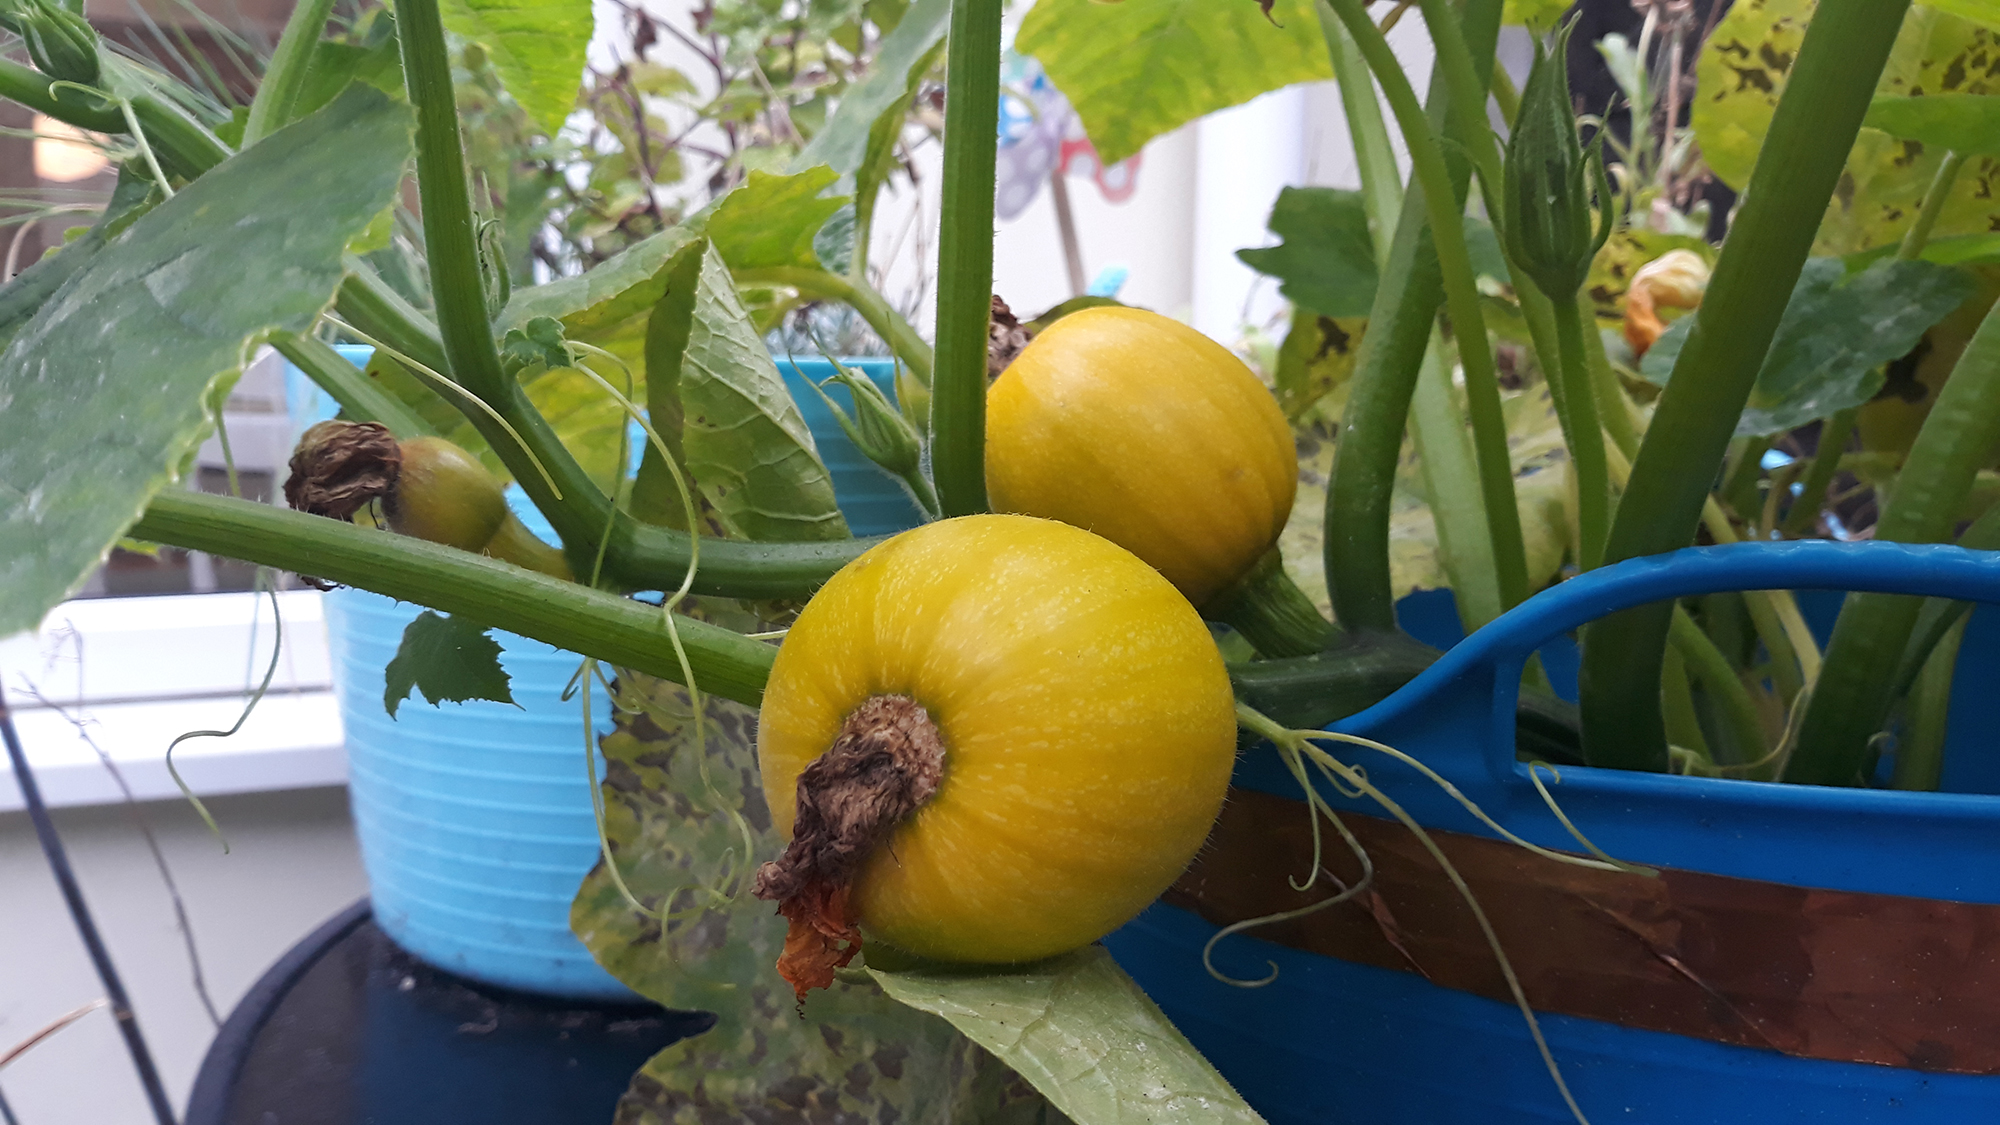 Male and female pumpkins growing – hard for the untrained eye to spot the difference!